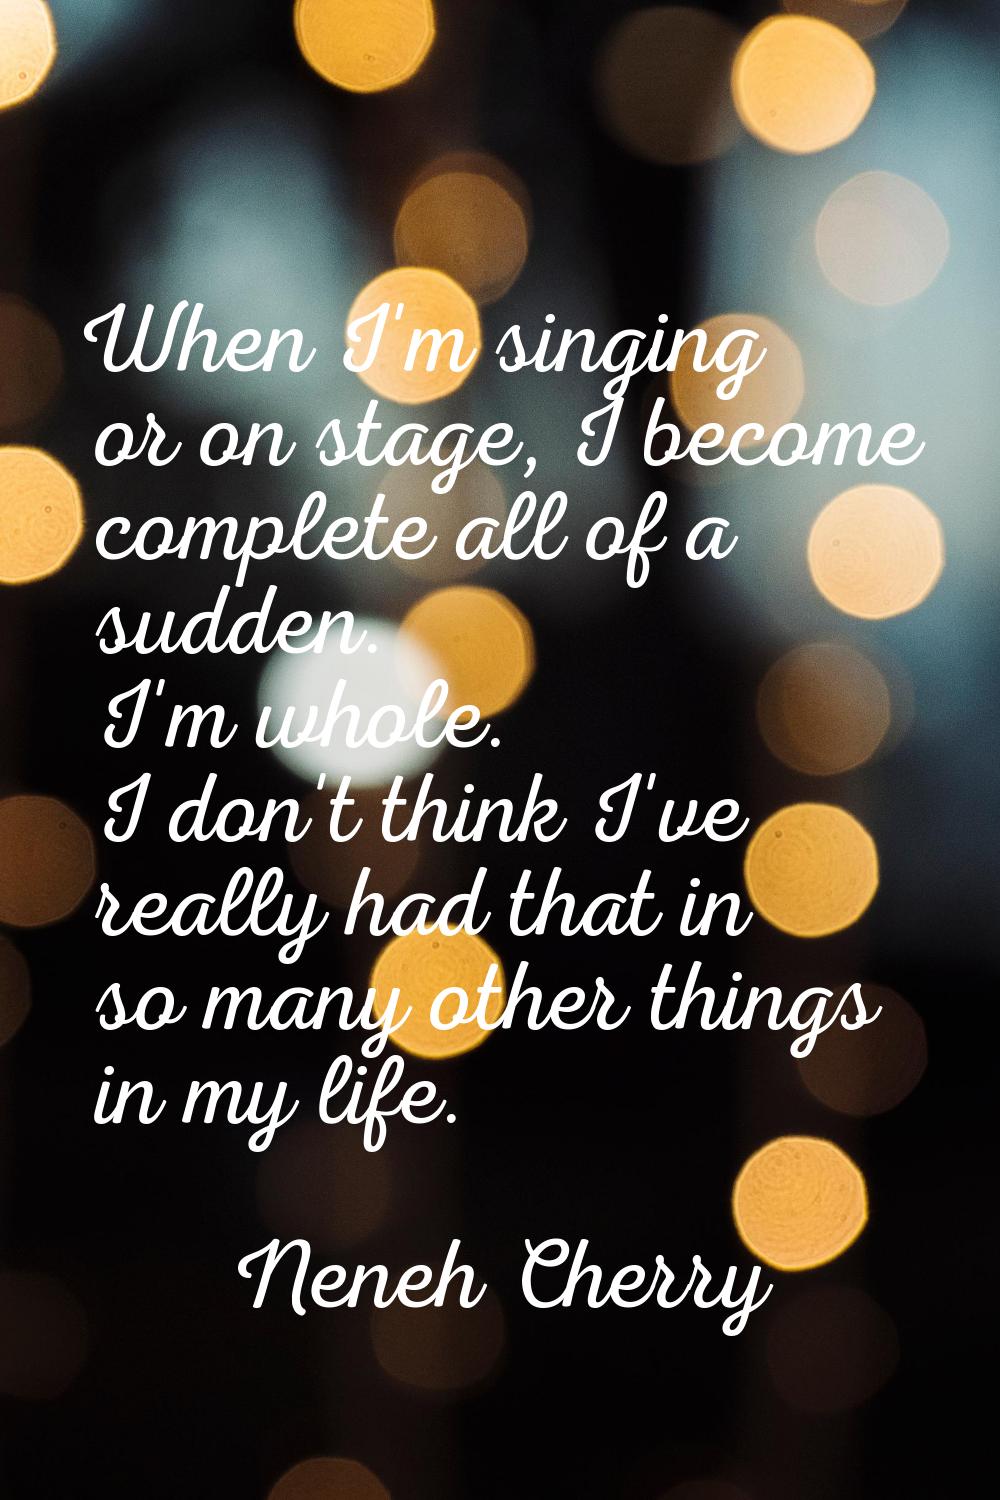 When I'm singing or on stage, I become complete all of a sudden. I'm whole. I don't think I've real